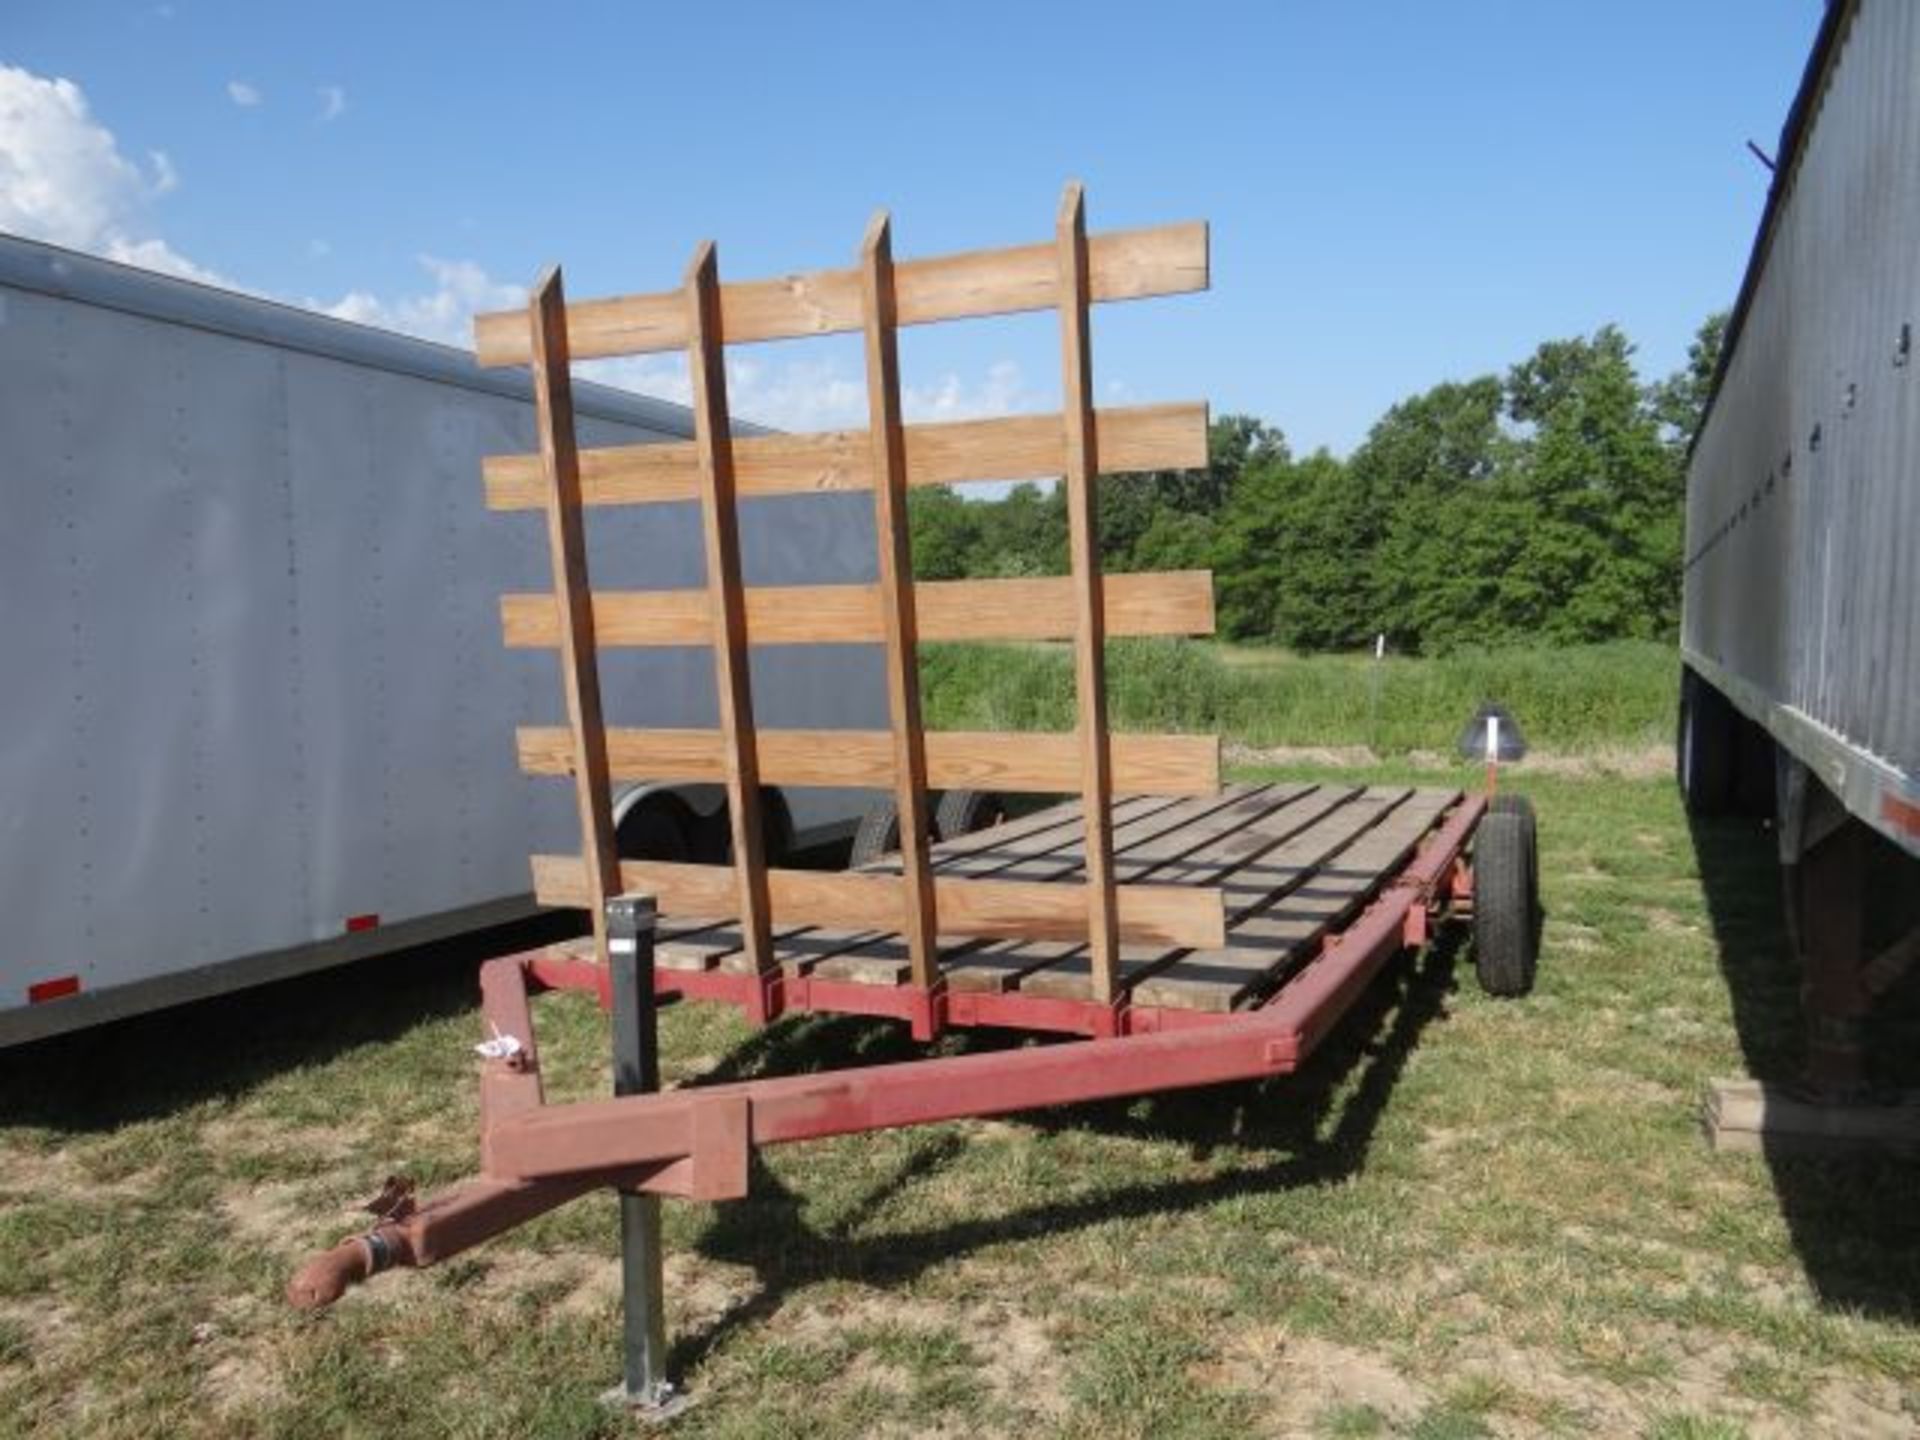 Donahue 20' Flatbed Trailer No Title - Image 2 of 3